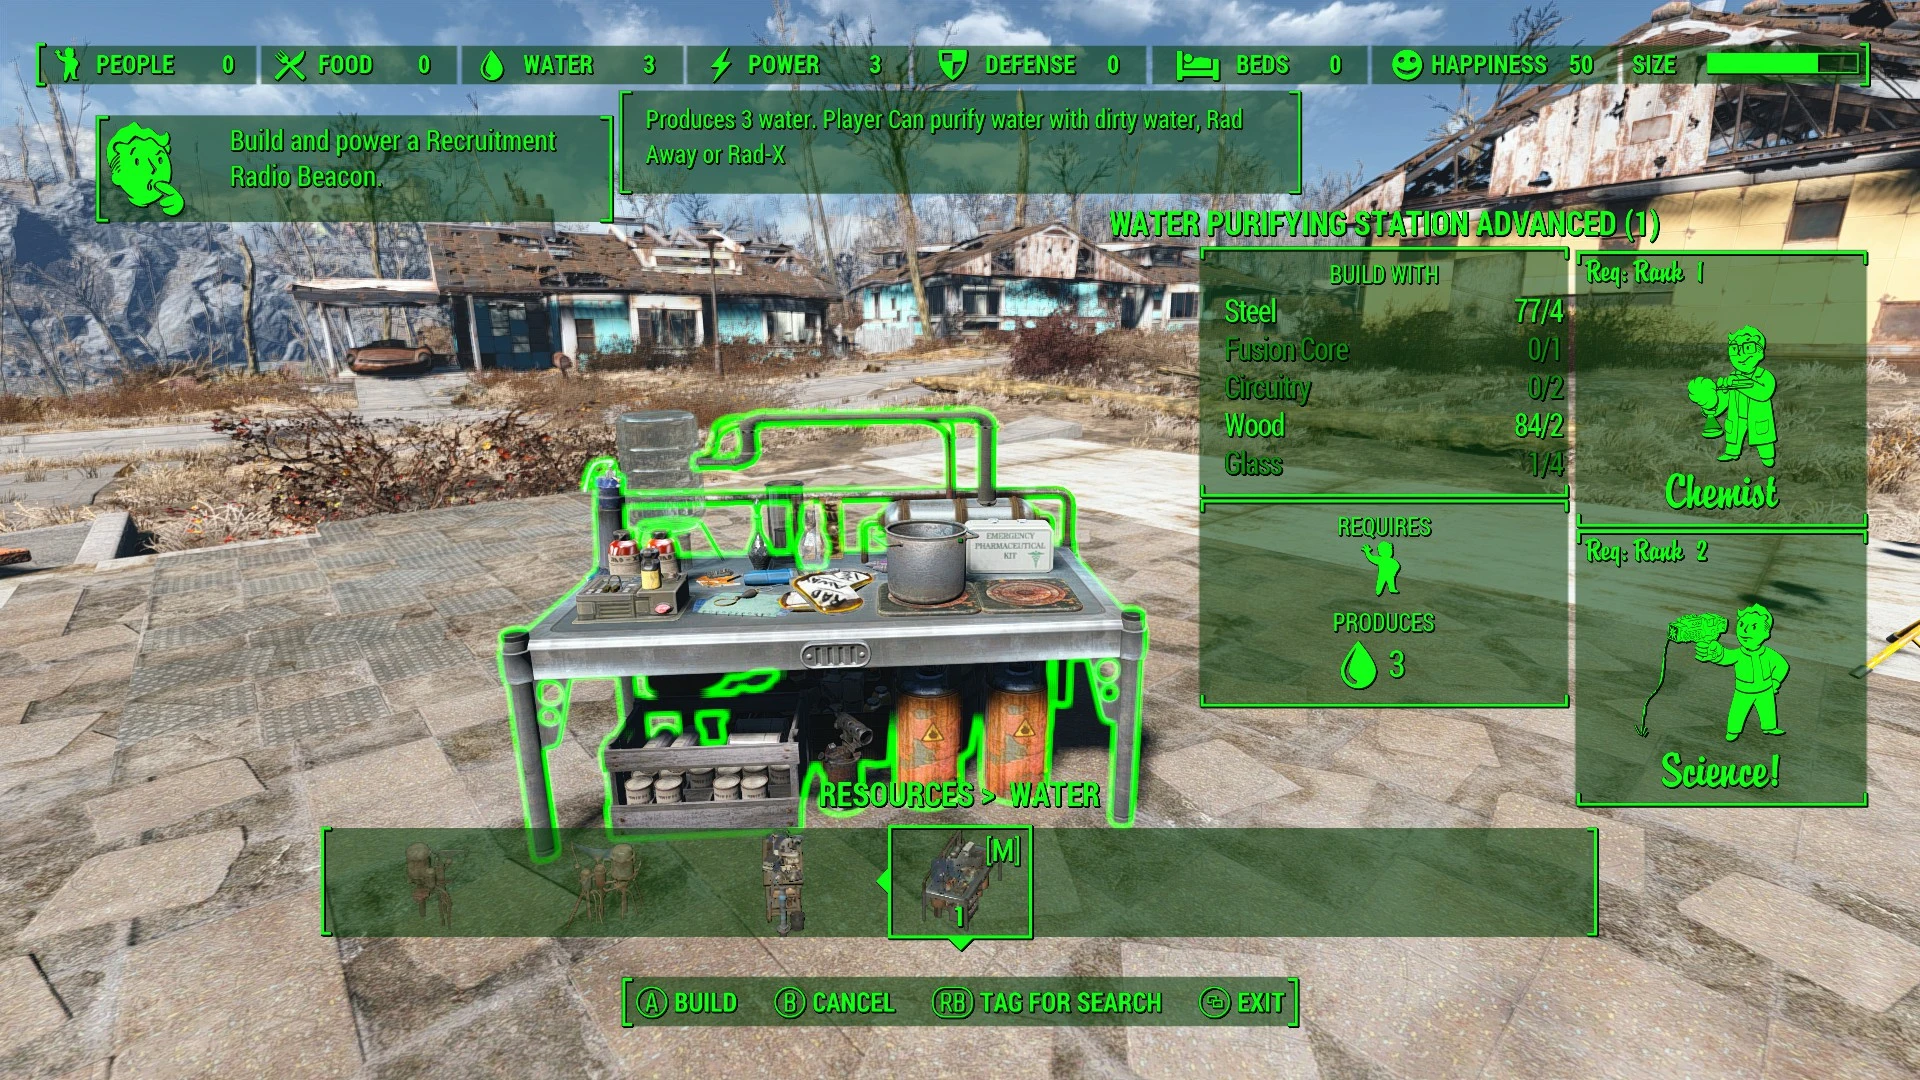 Activate the water pumps fallout 4 фото 76